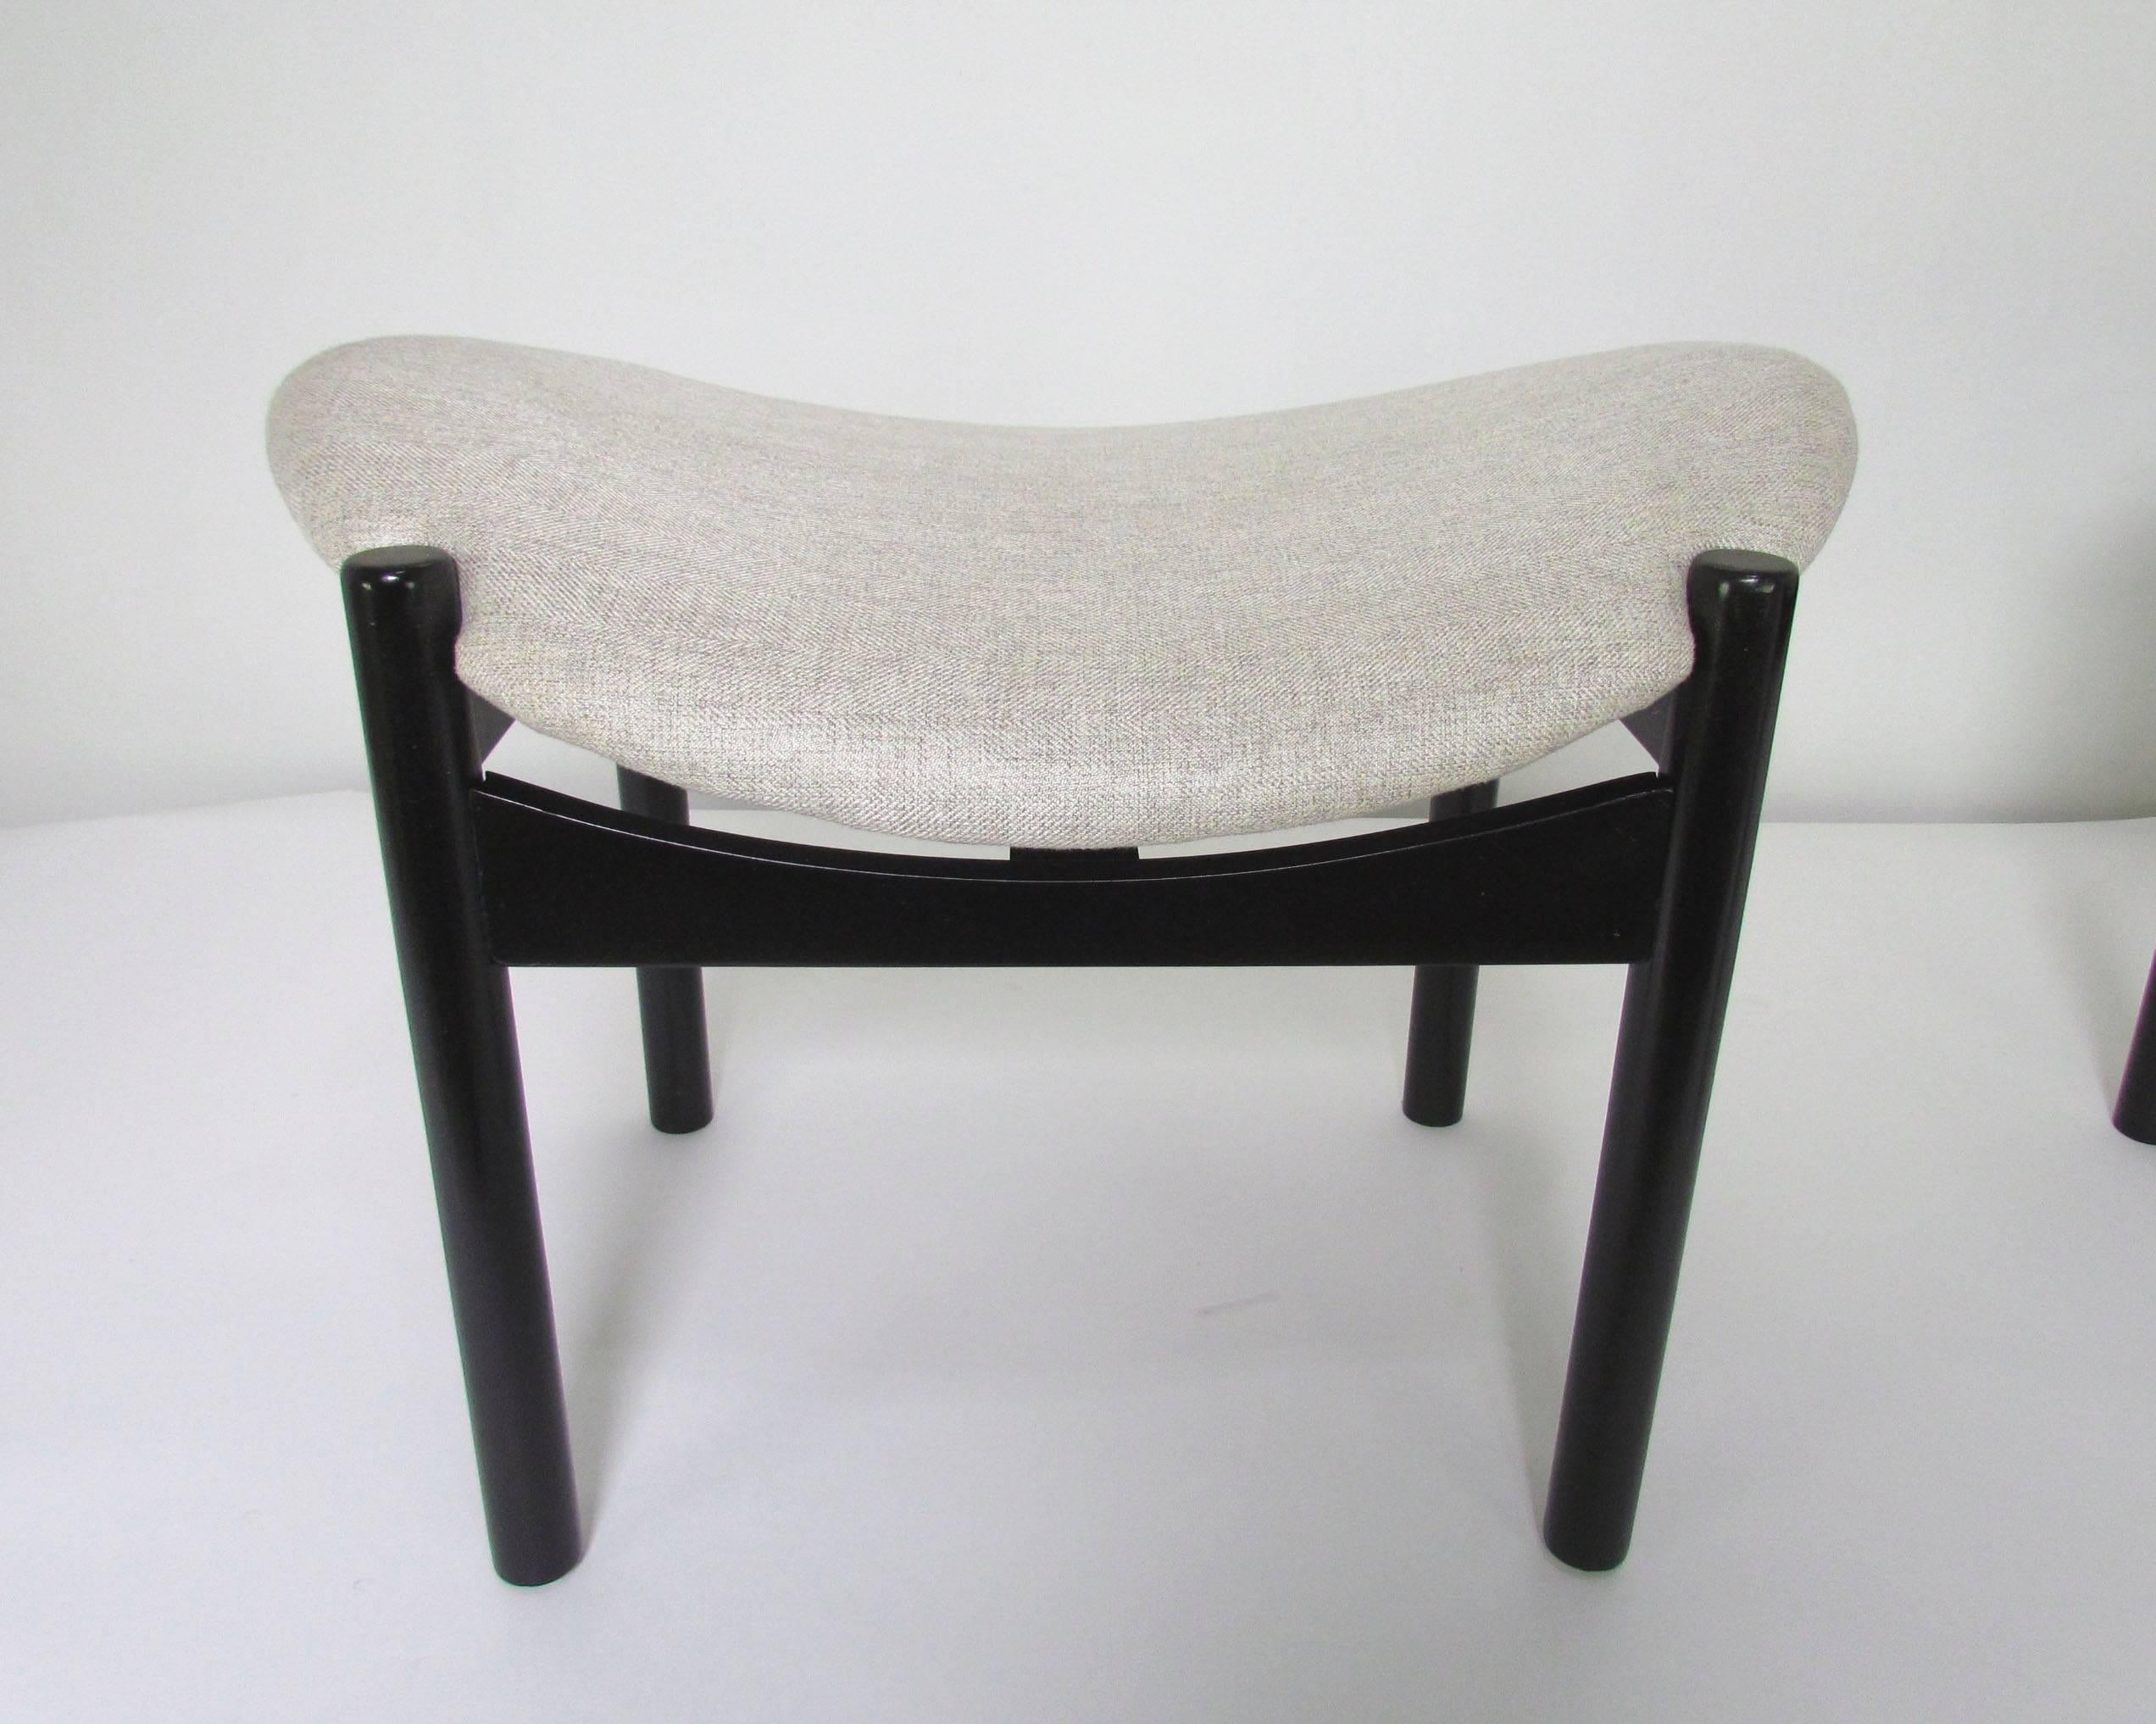 Pair of midcentury stools or single seat benches with wide 